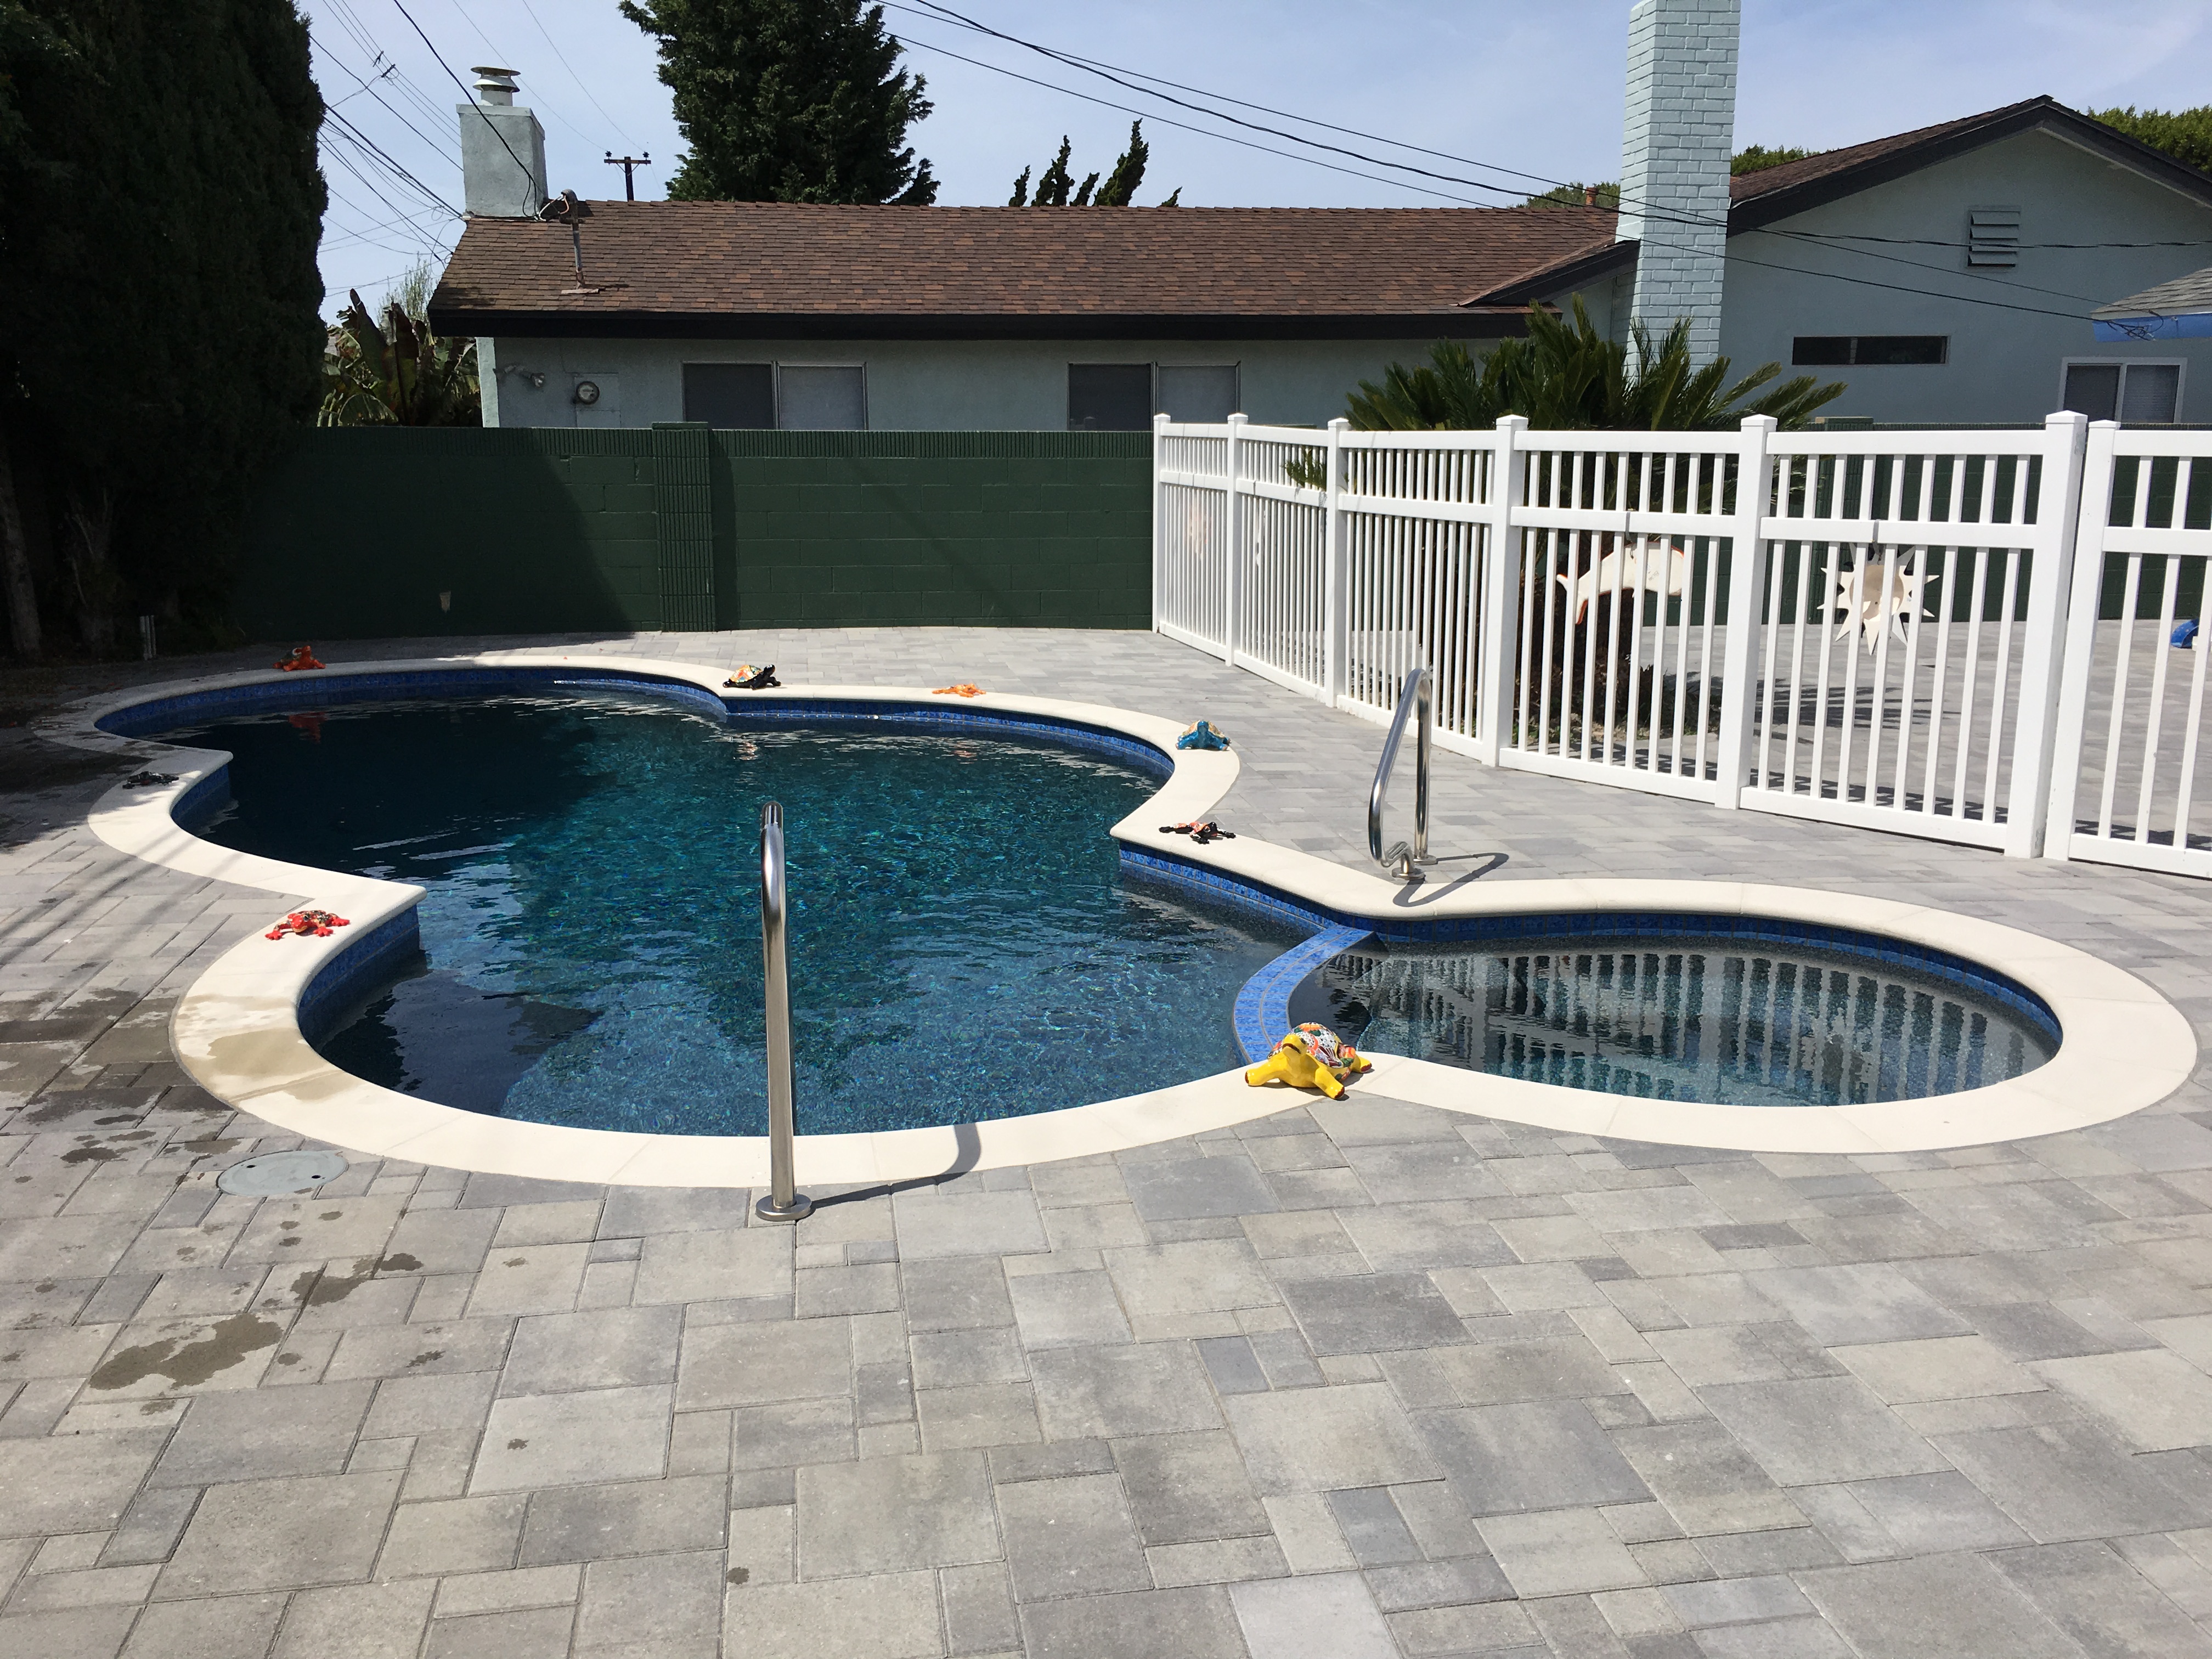 Gray pavers with white coping and pebble finish